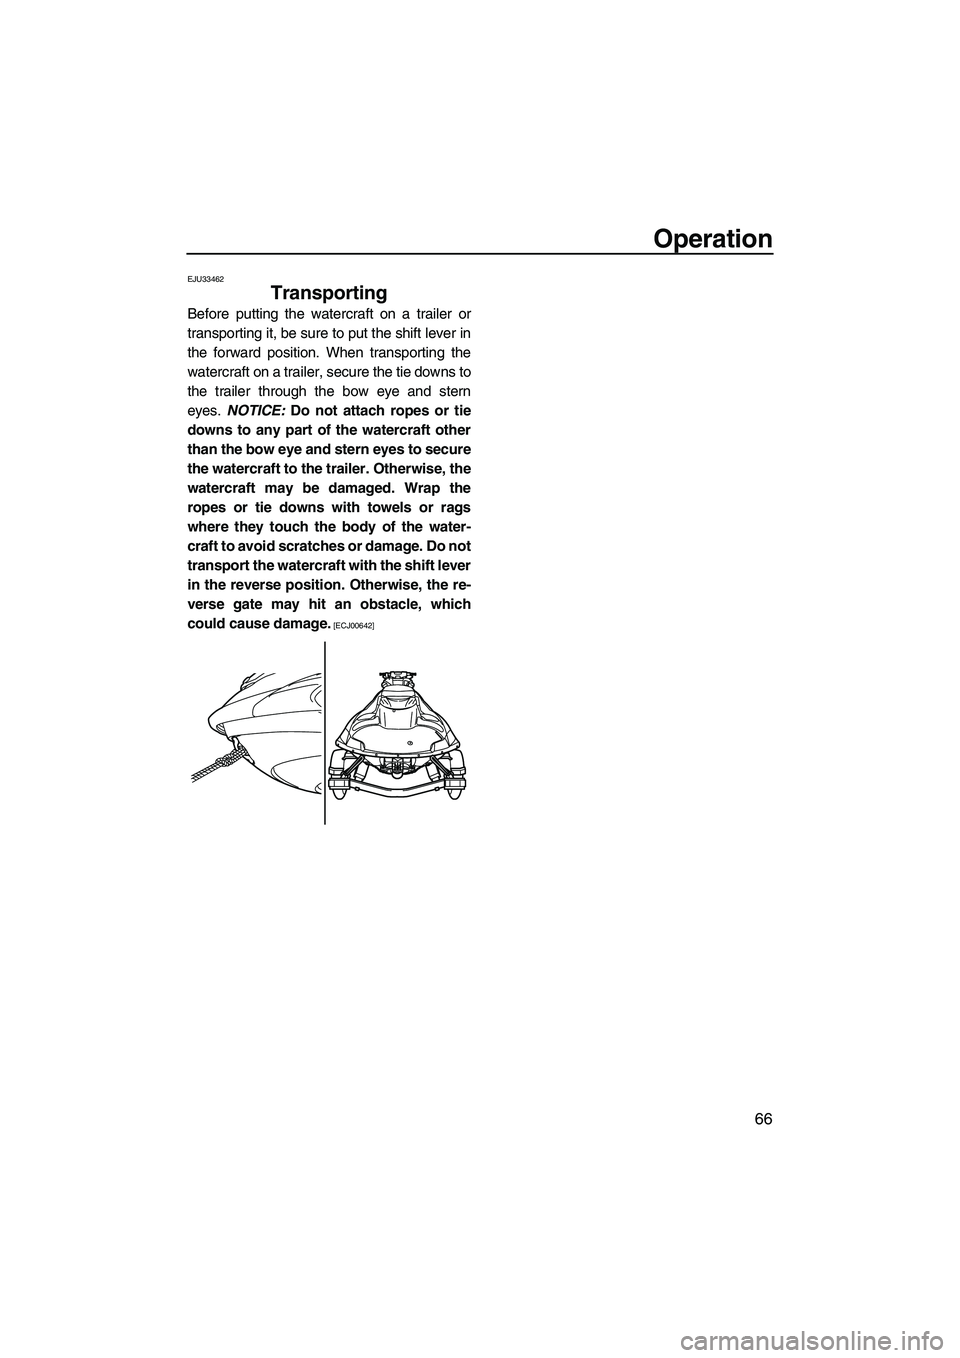 YAMAHA FZR 2009  Owners Manual Operation
66
EJU33462
Transporting 
Before putting the watercraft on a trailer or
transporting it, be sure to put the shift lever in
the forward position. When transporting the
watercraft on a trailer